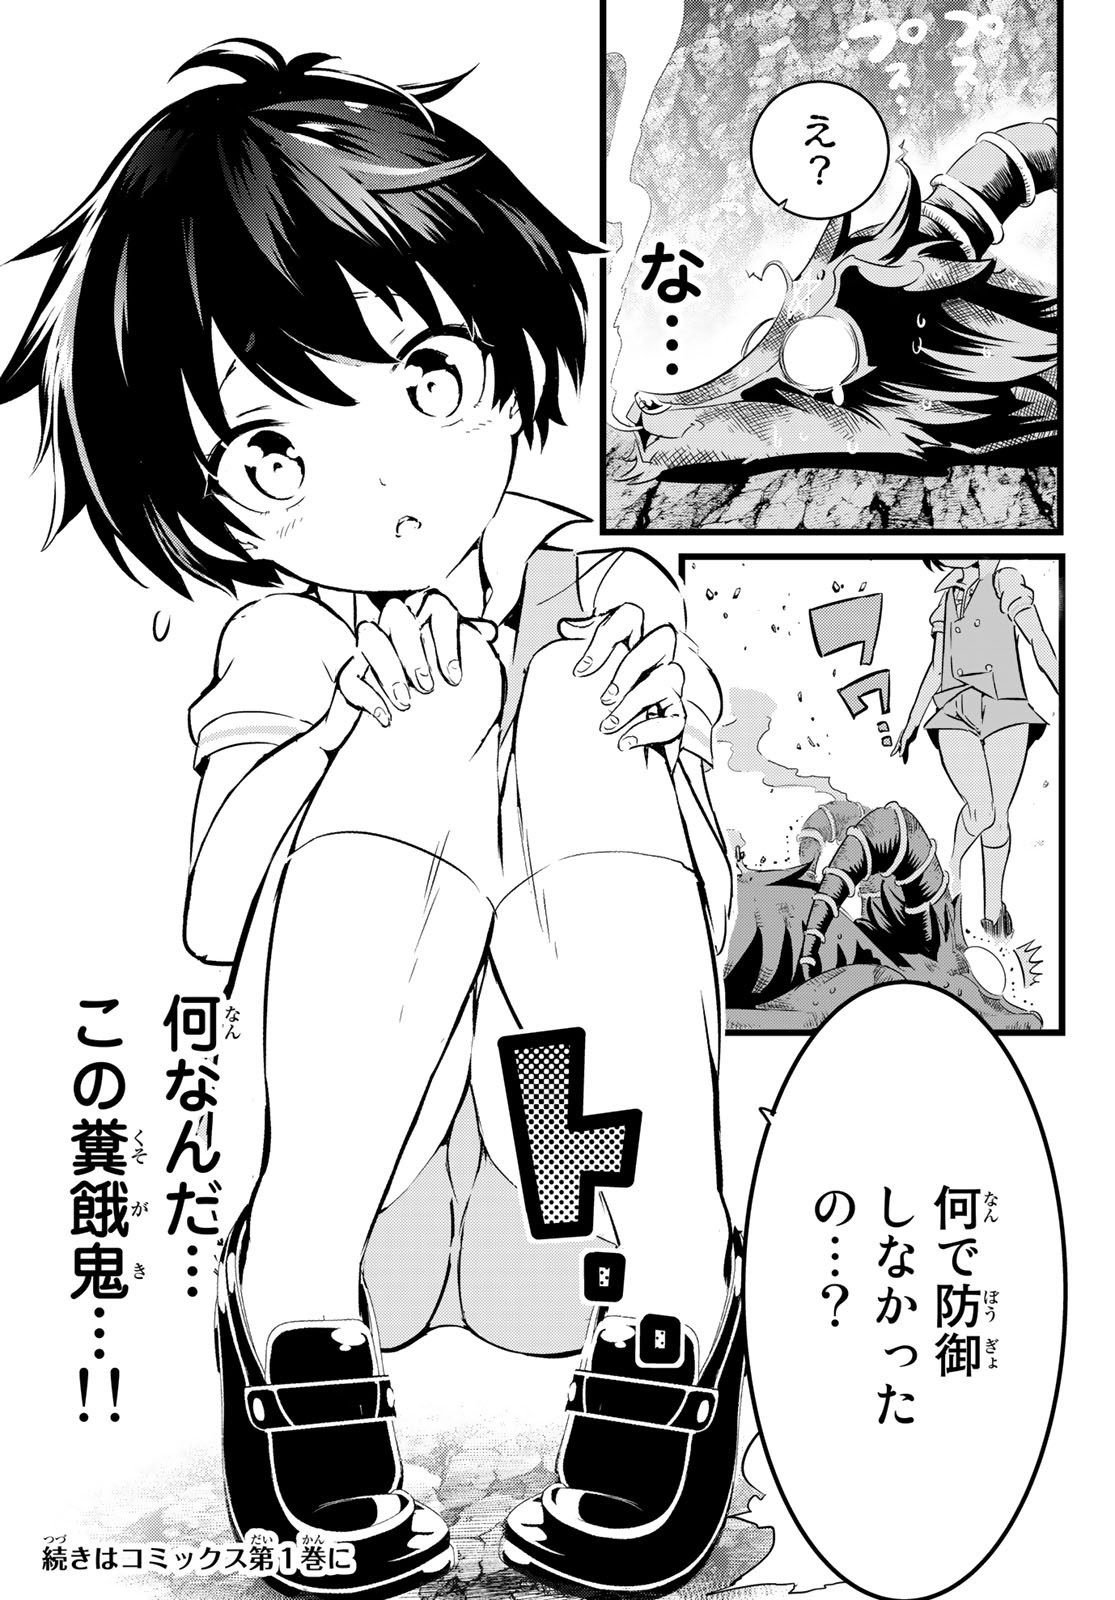 Weekly Shōnen Magazine - 週刊少年マガジン - Chapter 2024-17 - Page 511